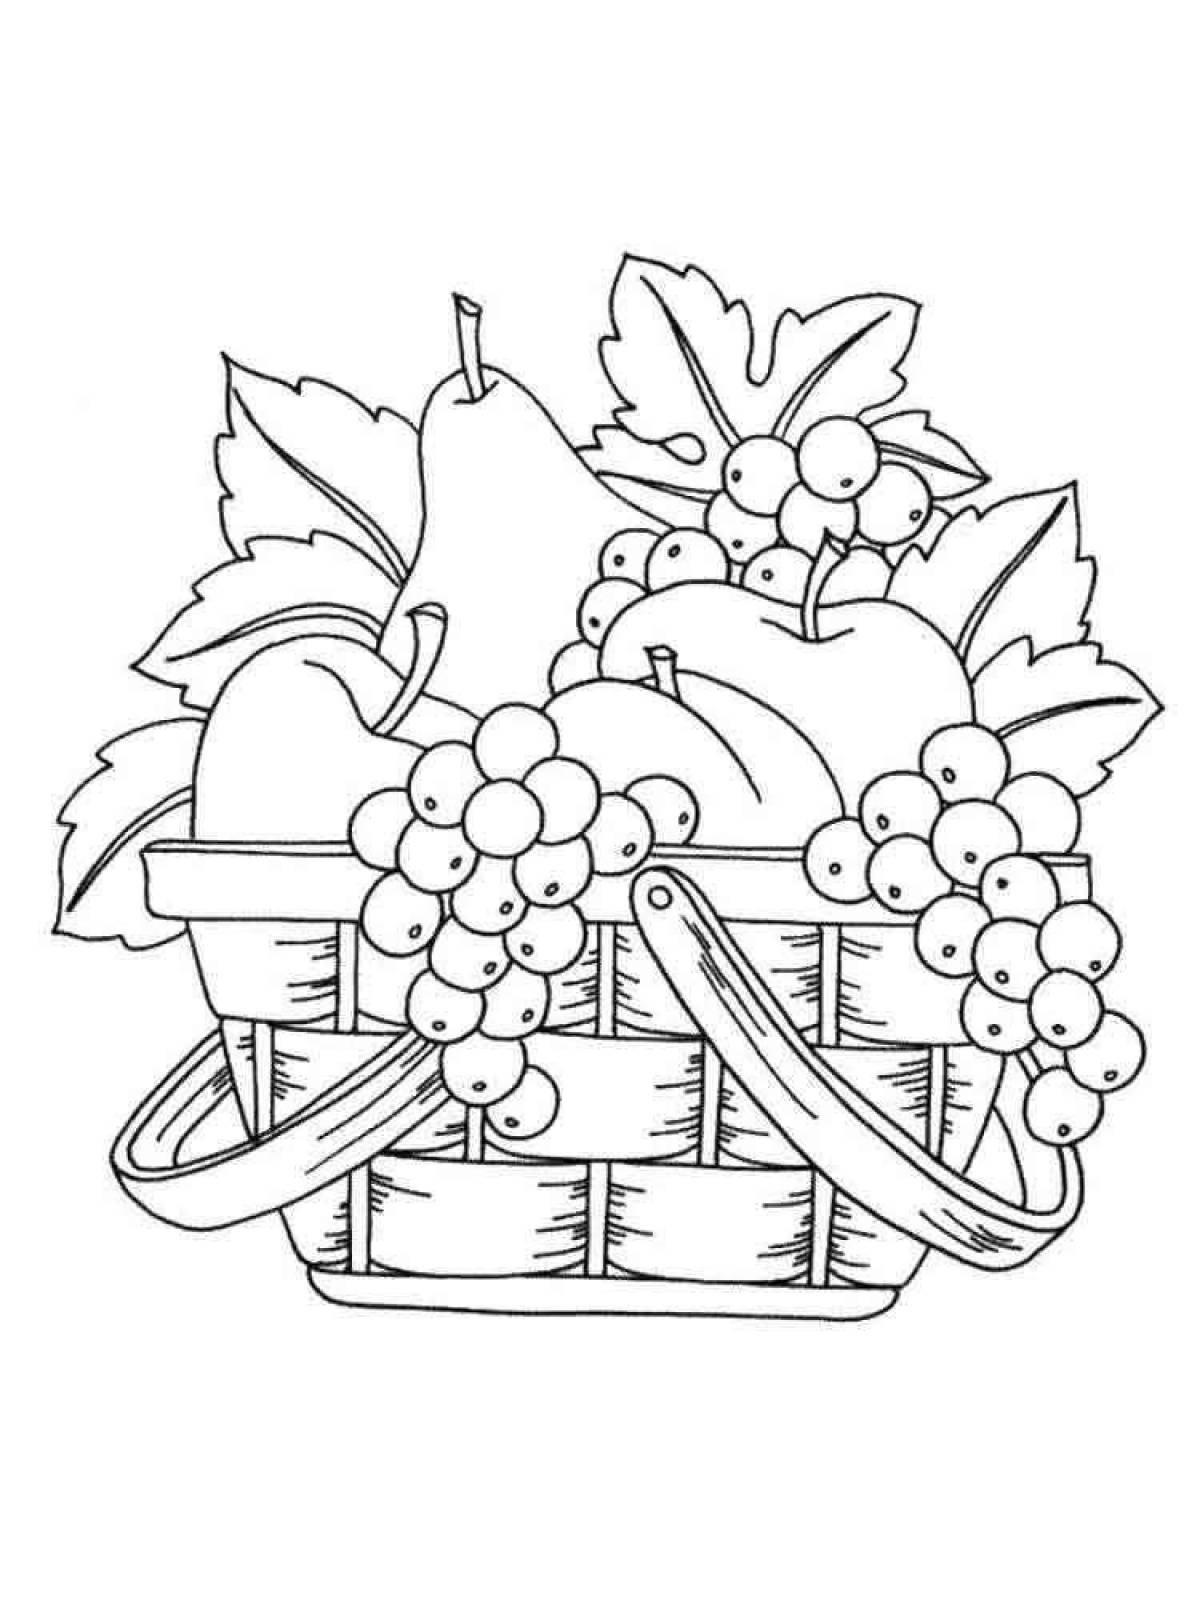 Brightly colored still life with fruit coloring book